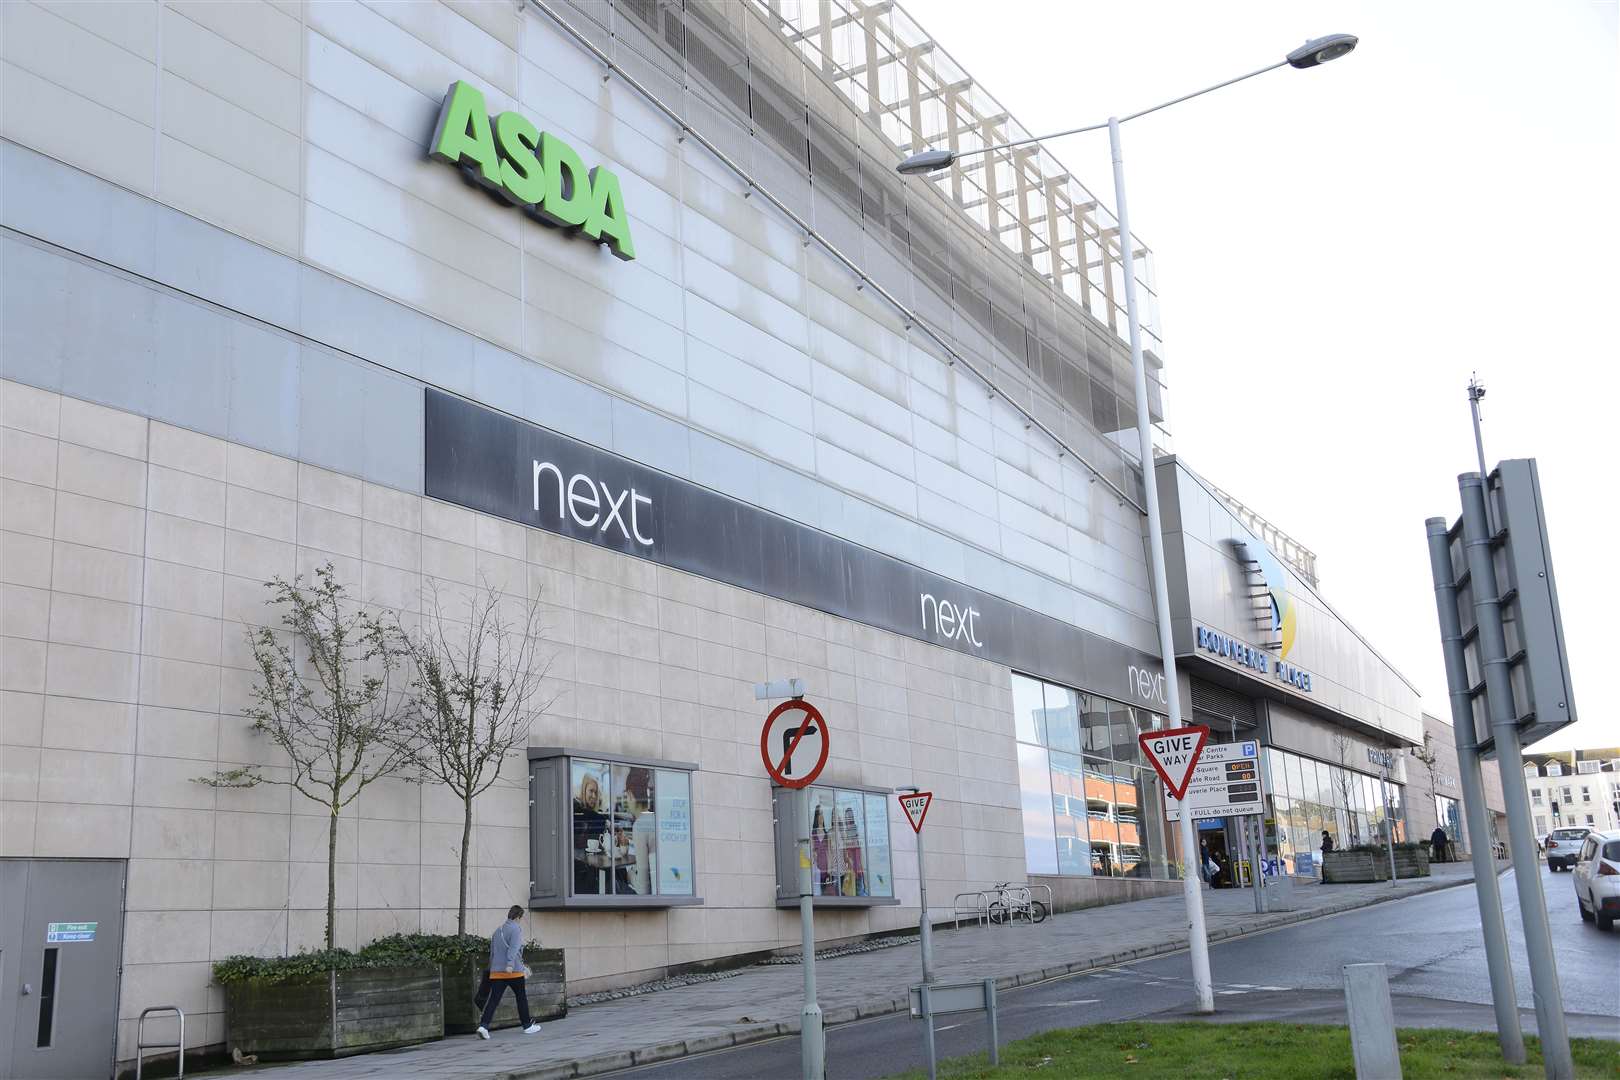 The Asda store in Bouverie Shopping Centre may be moving Picture: Paul Amos